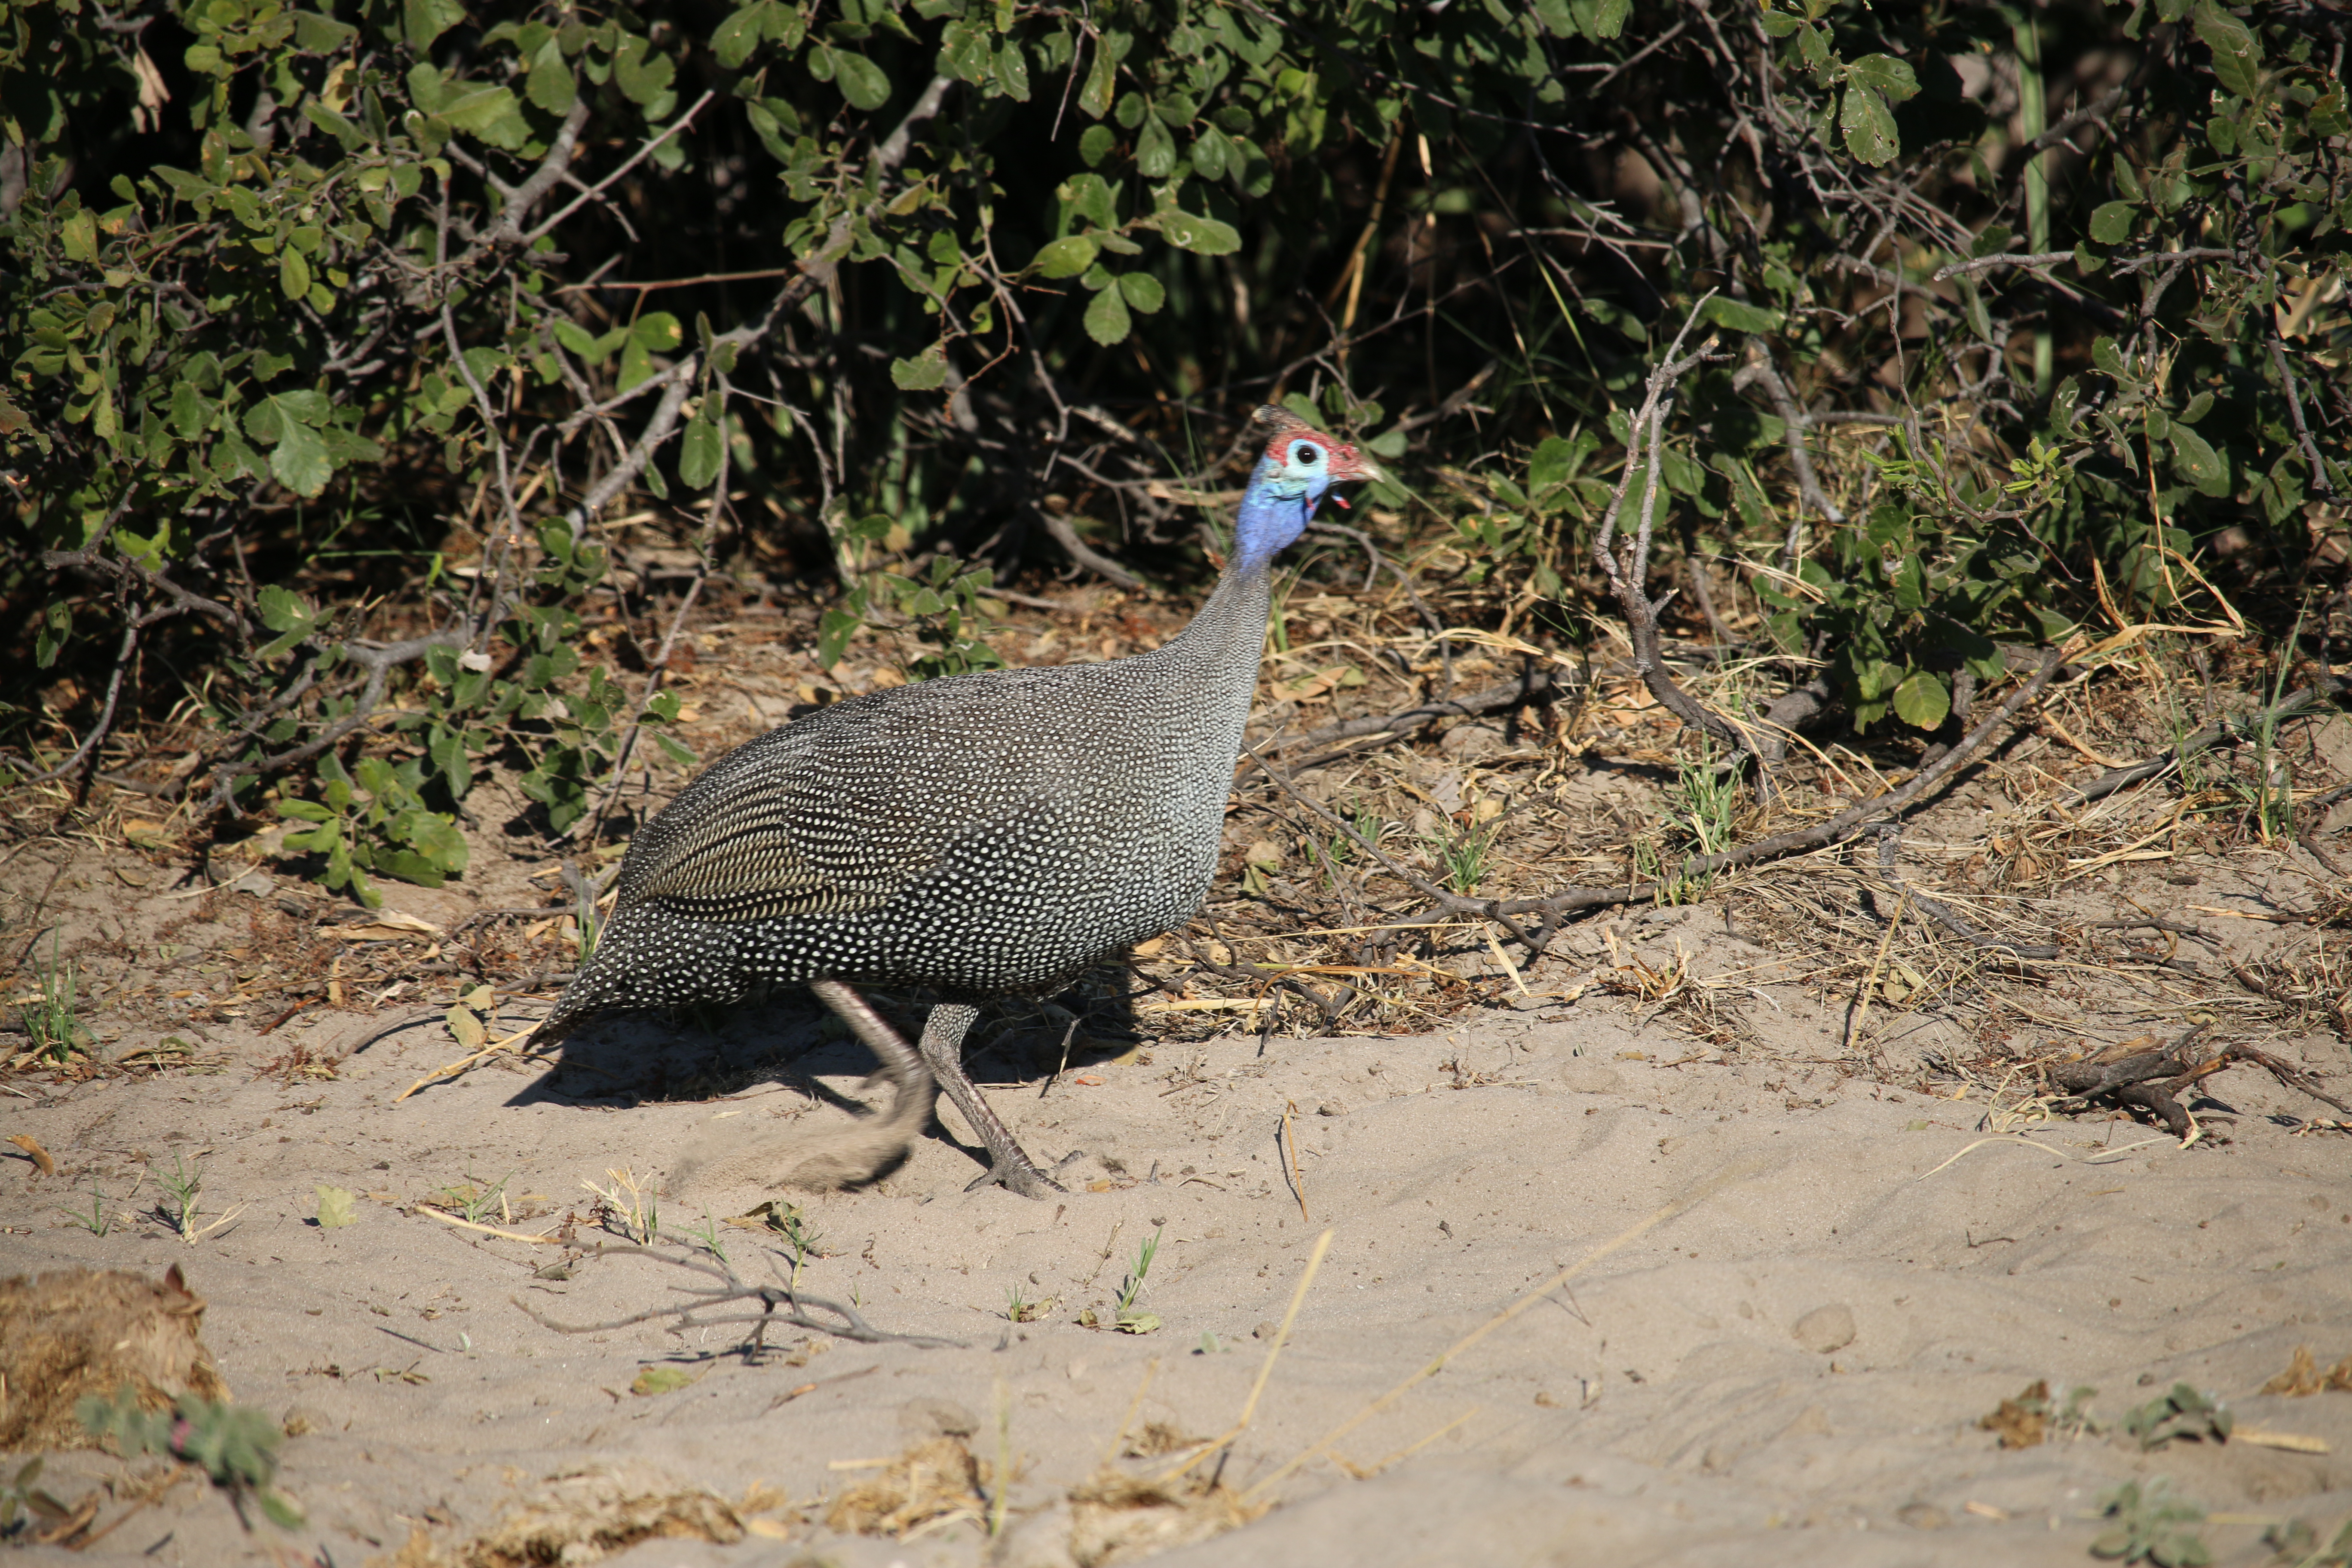 Helmeted Guinea Fowl, I just thought it had interesting coloring. Turns out it's a very popular fowl among hunters. 